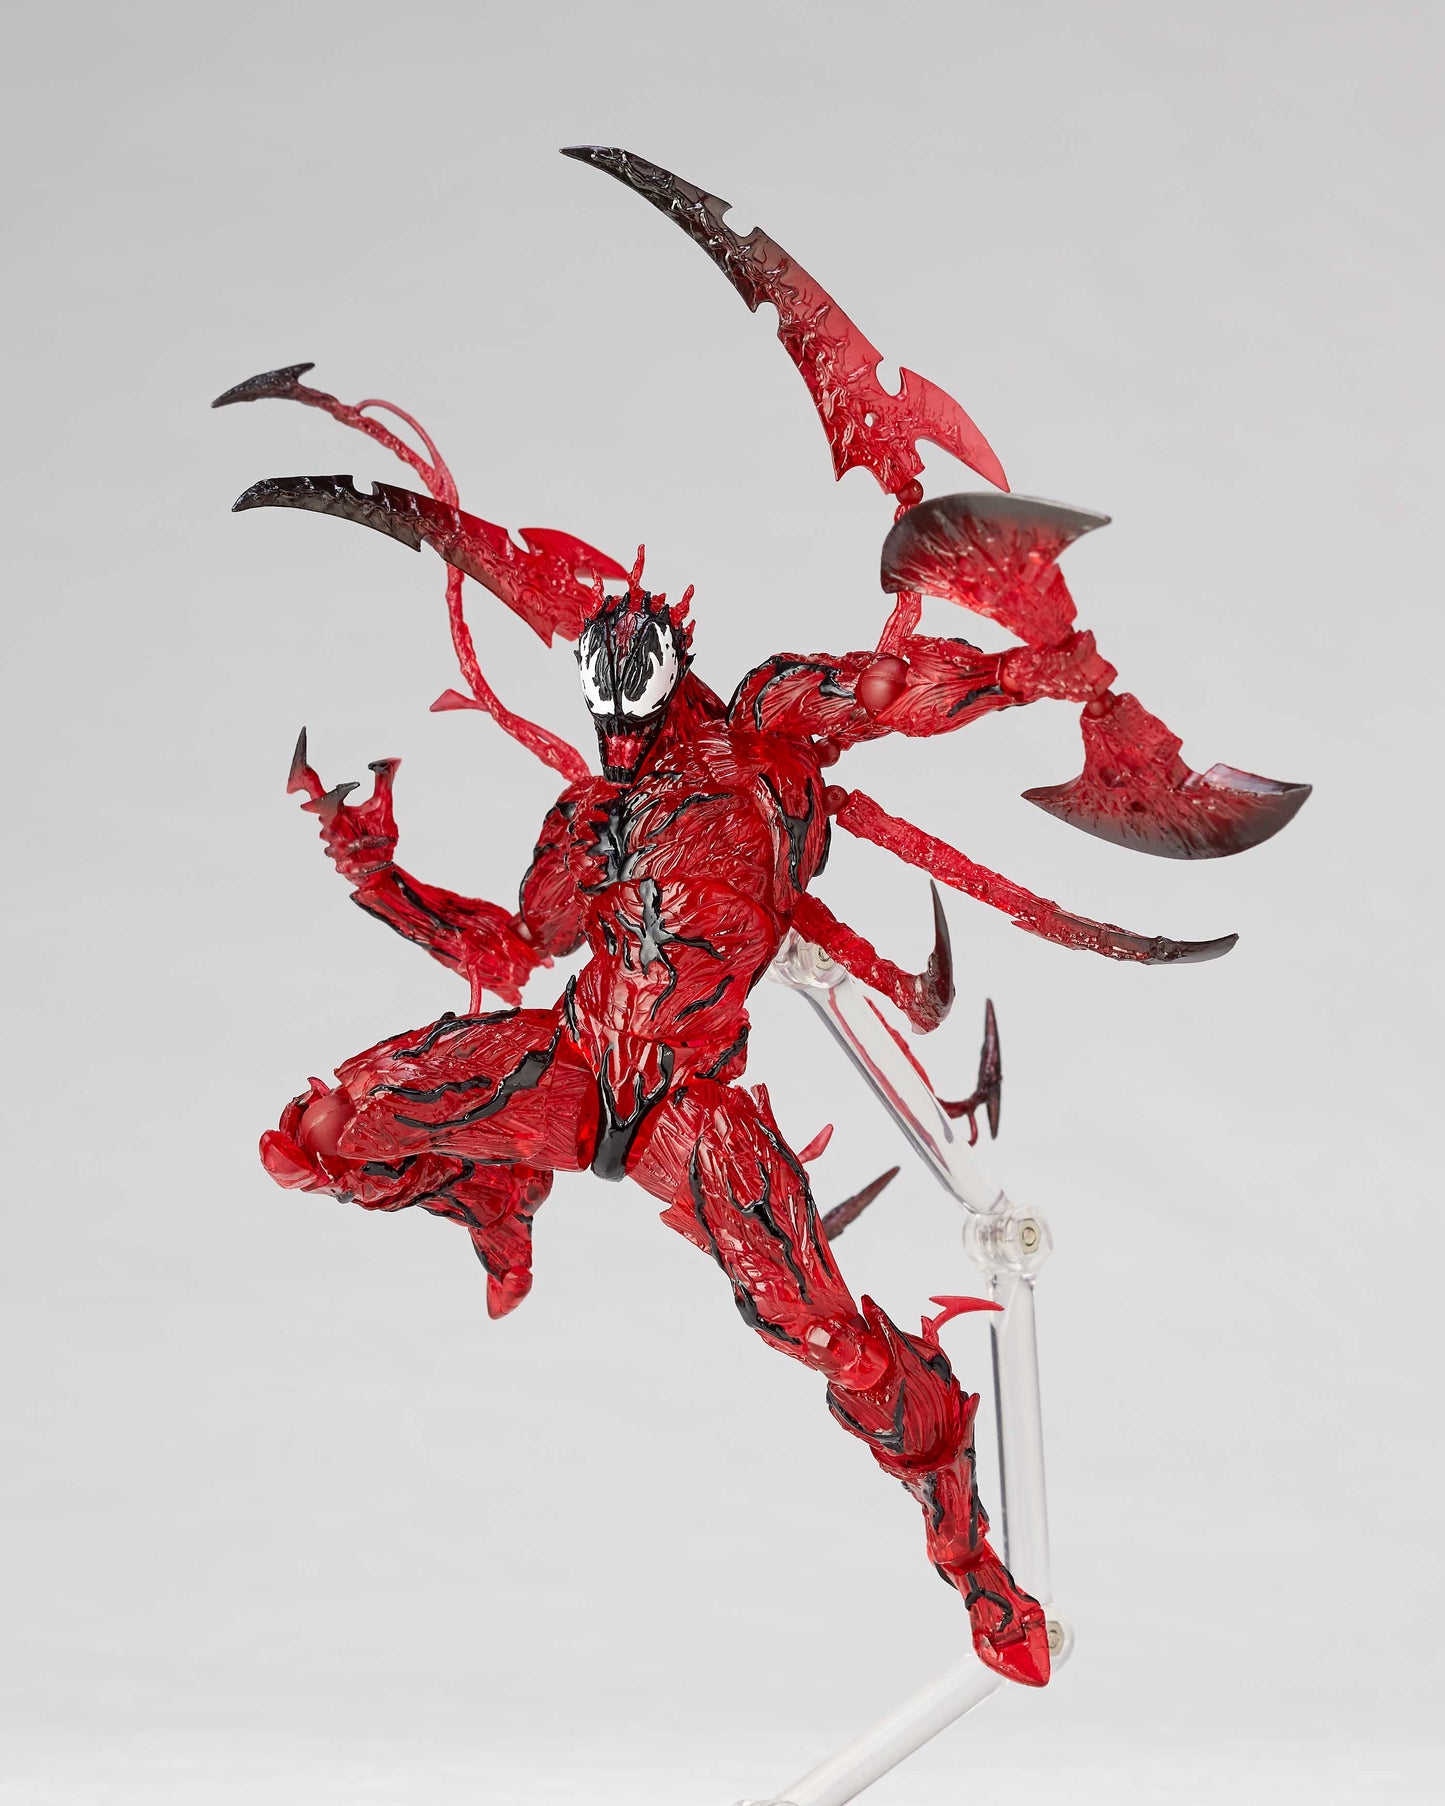 Kaiyodo Revoltech Amazing Yamaguchi 008EX Marvel Spider-Man Carnage Limited Edition Clear ver Action Figure